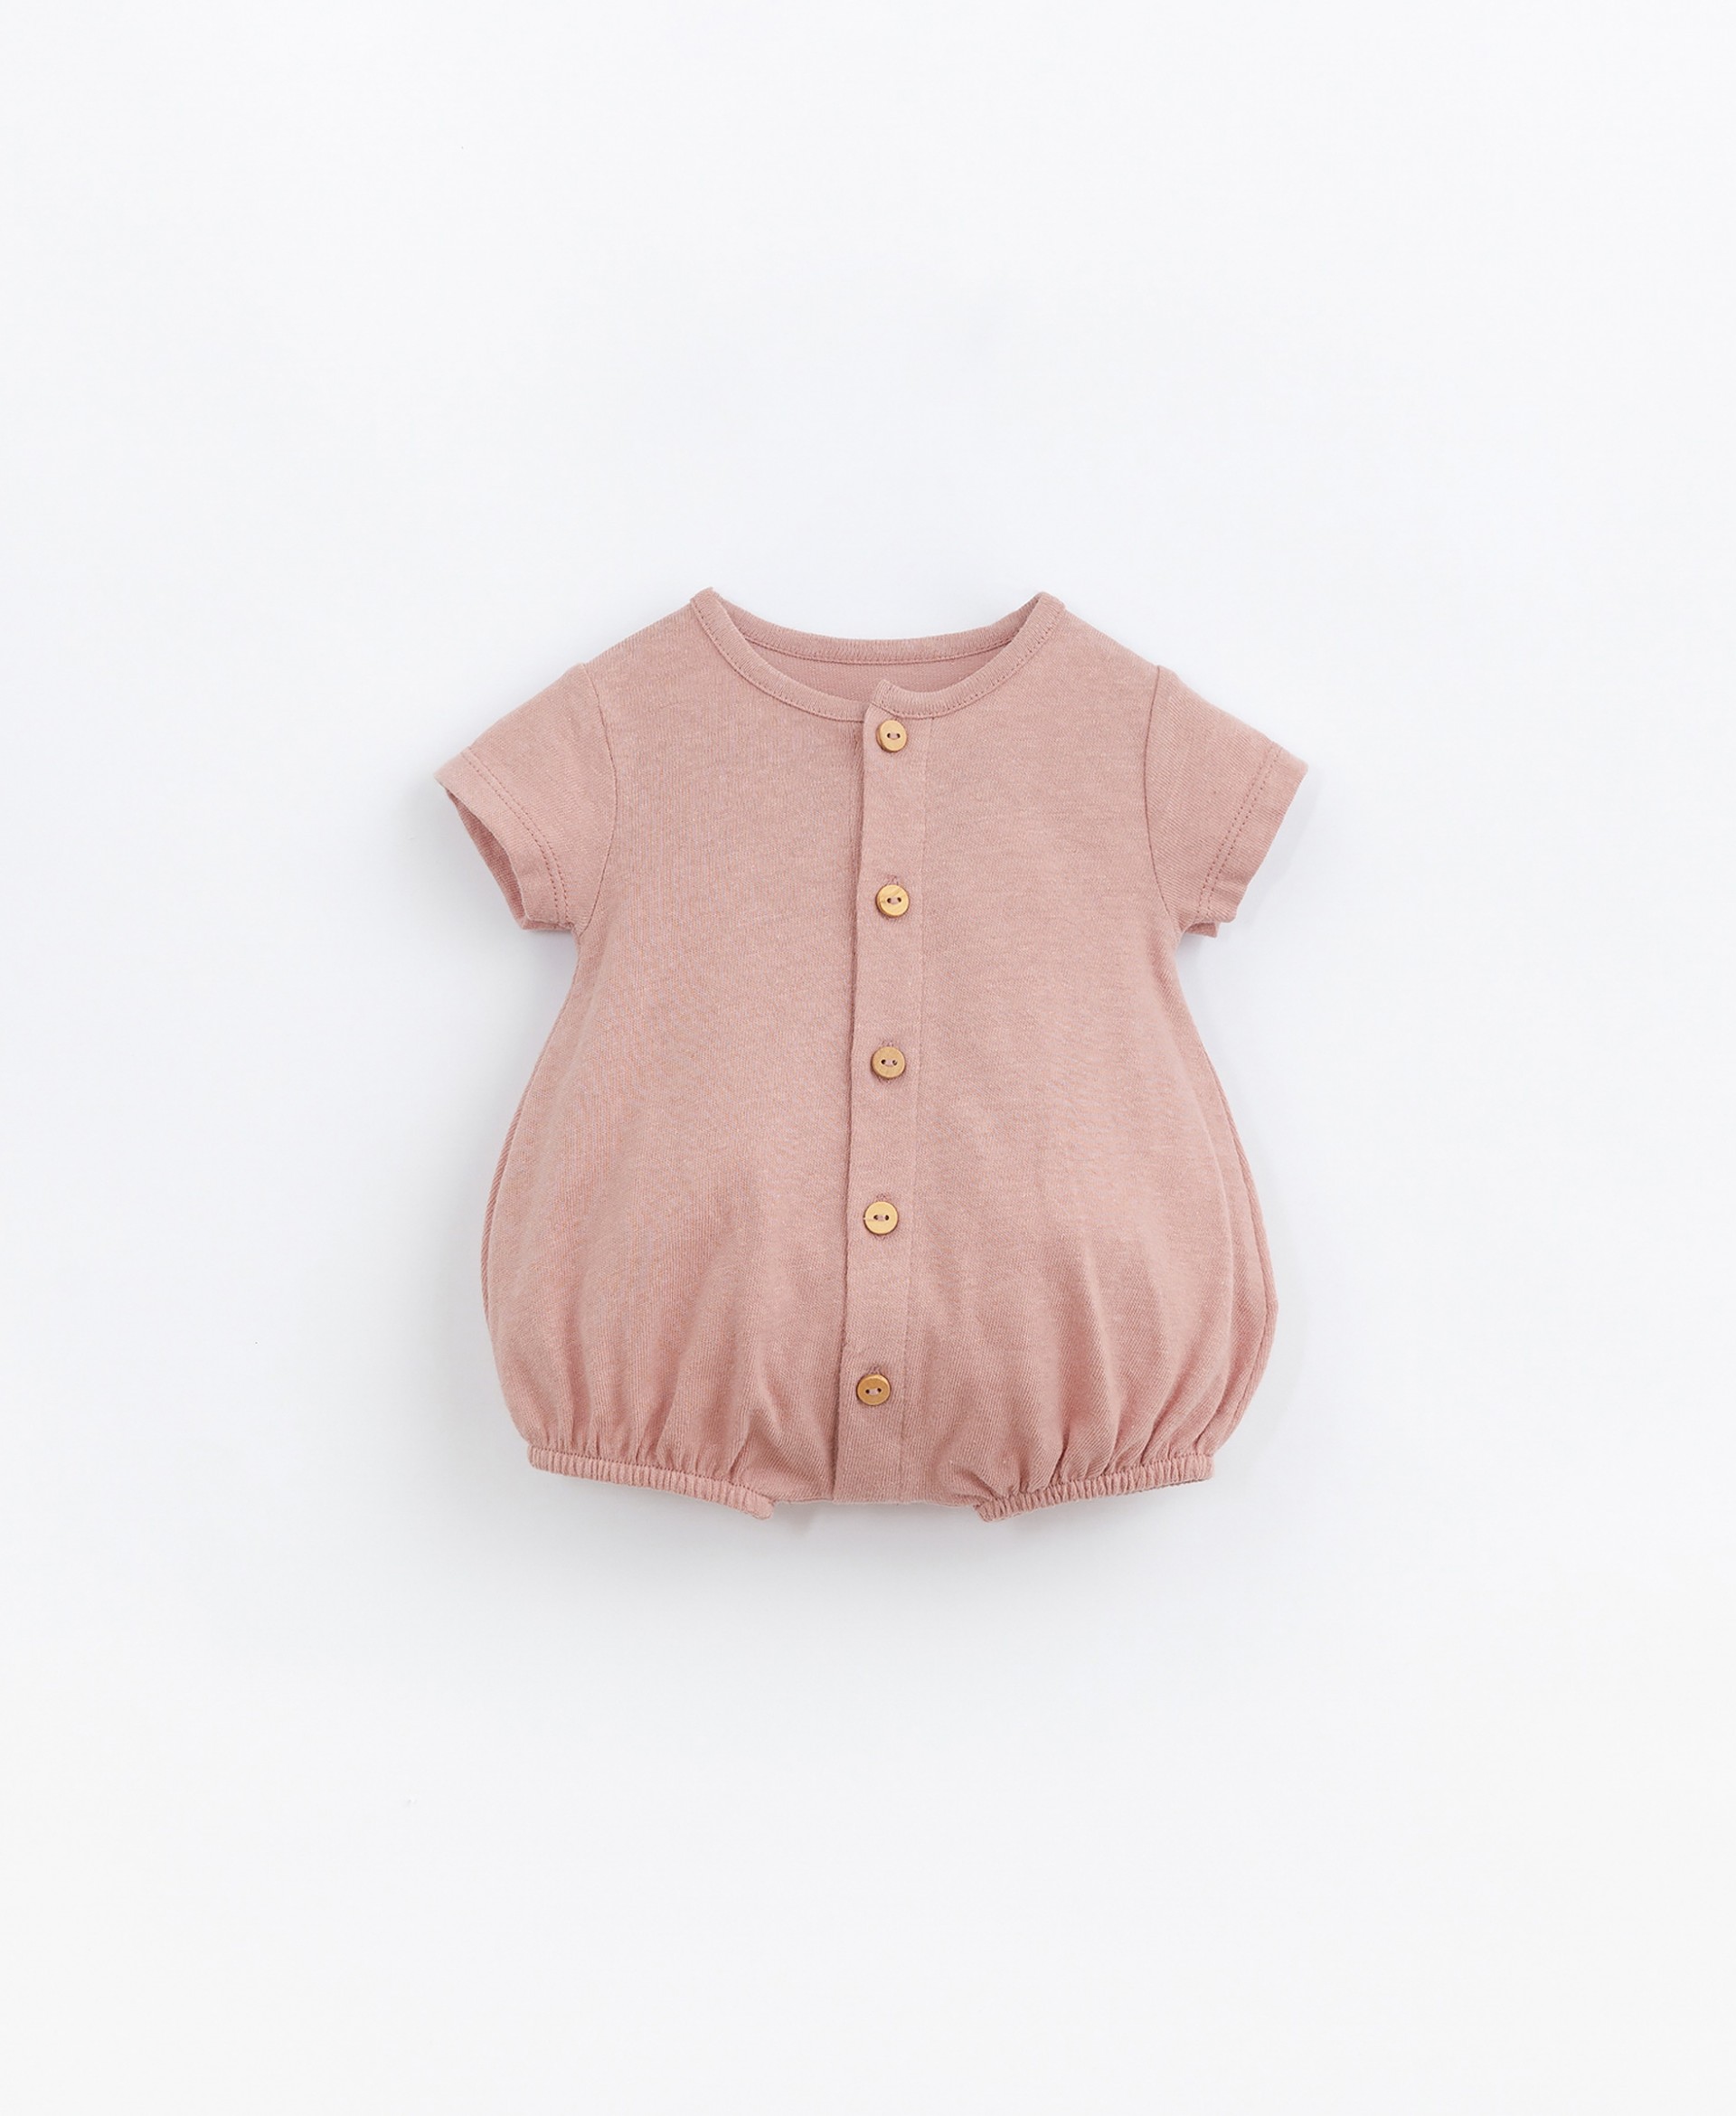 Jumpsuit with wooden button opening | Basketry